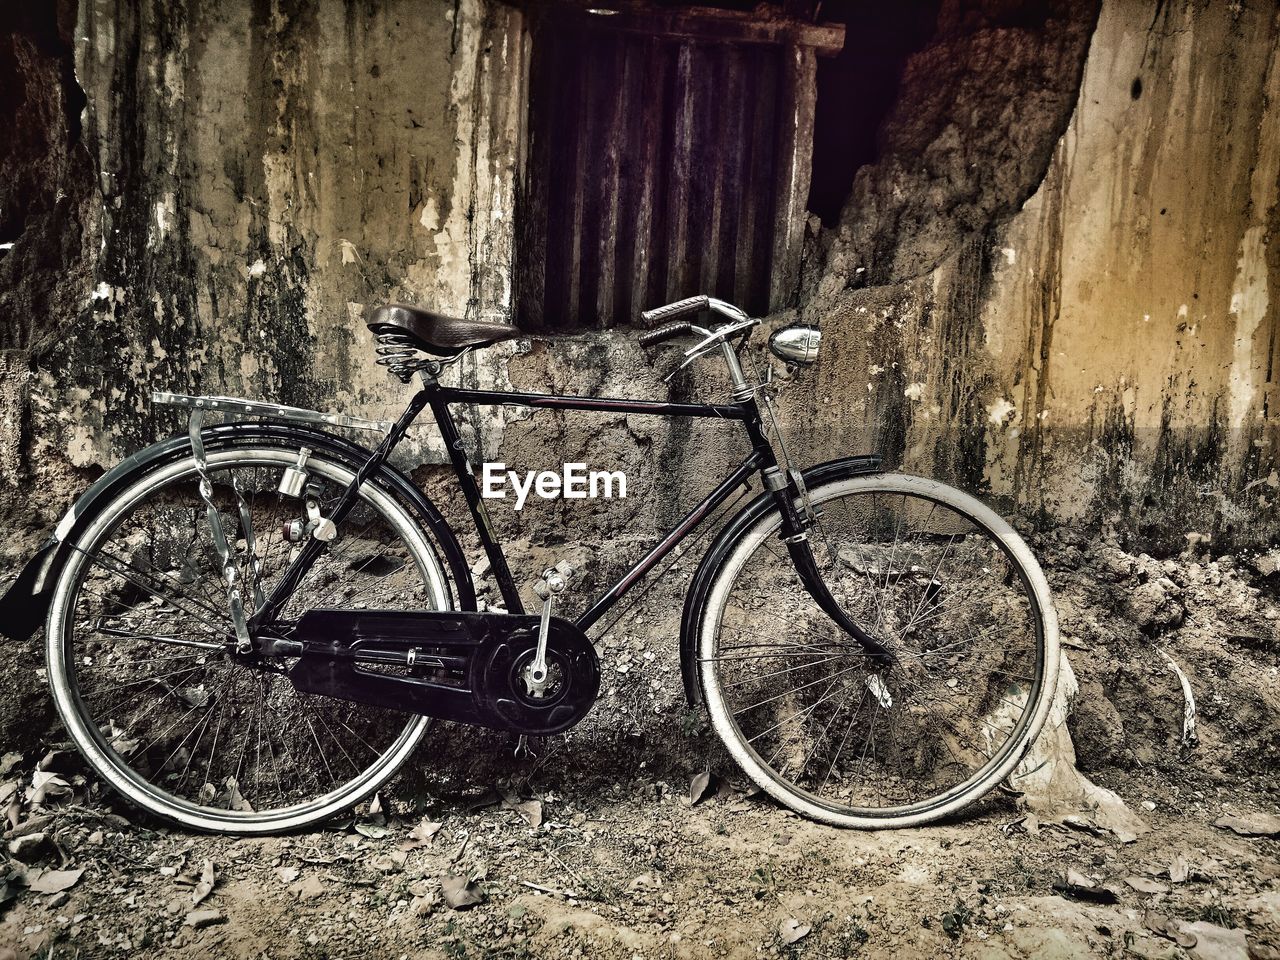 BICYCLE PARKED IN ABANDONED OLD BUILDING